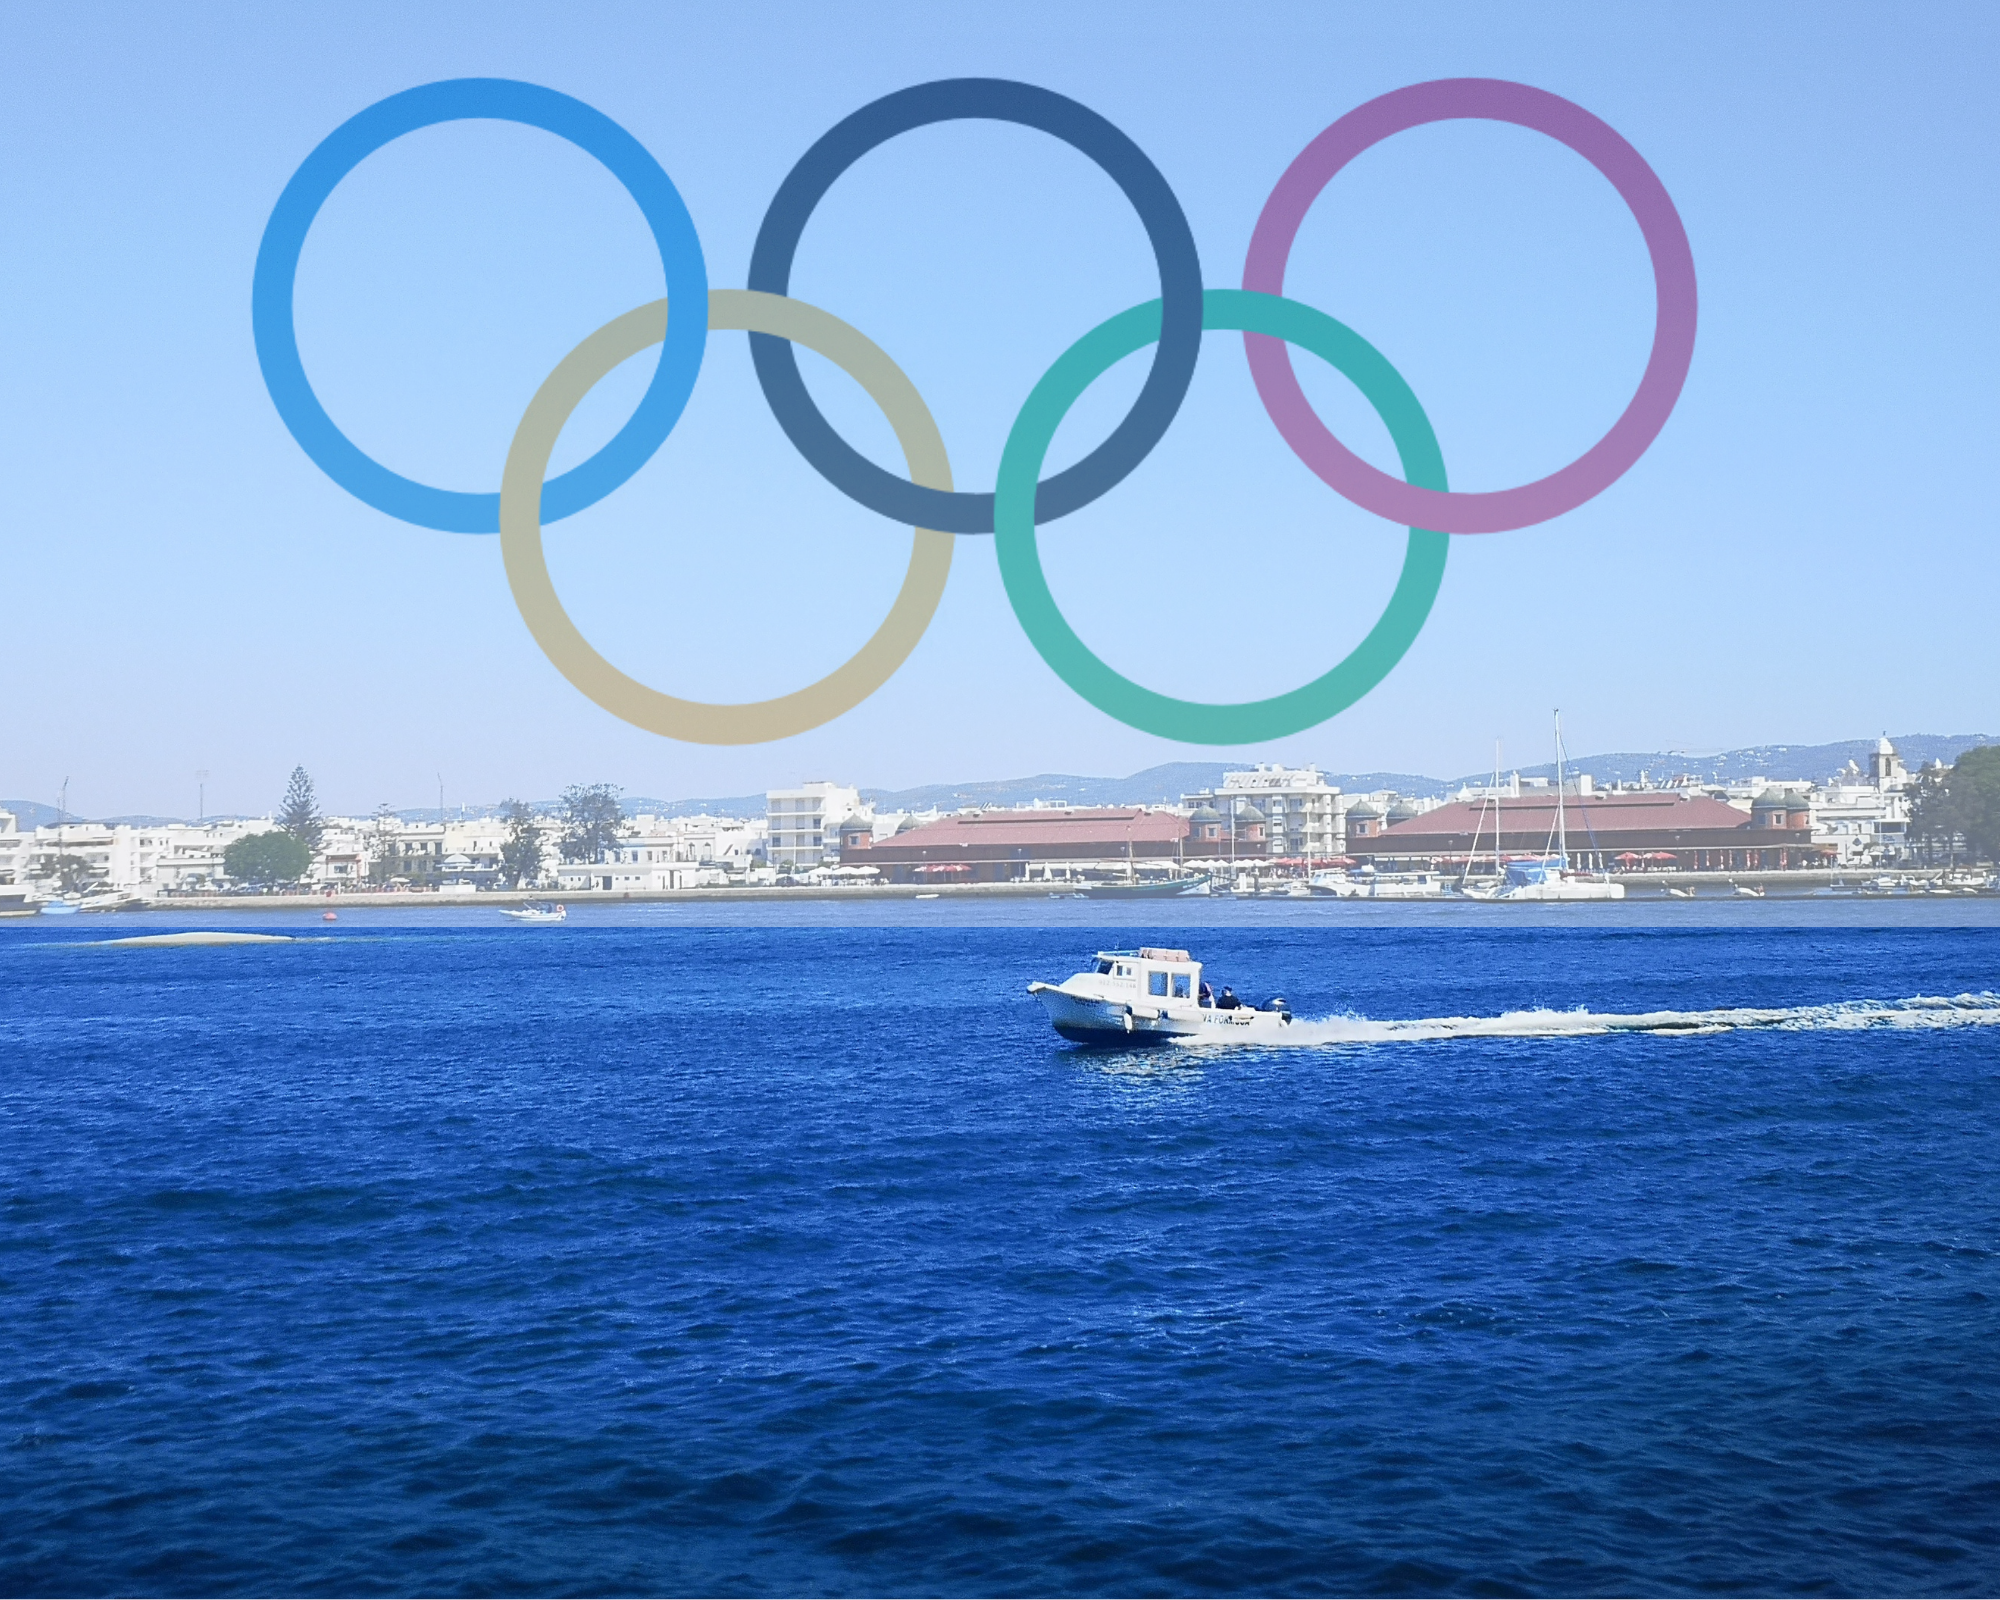 CNE obliges Municipality of Olhão to postpone homage to Olympic champions